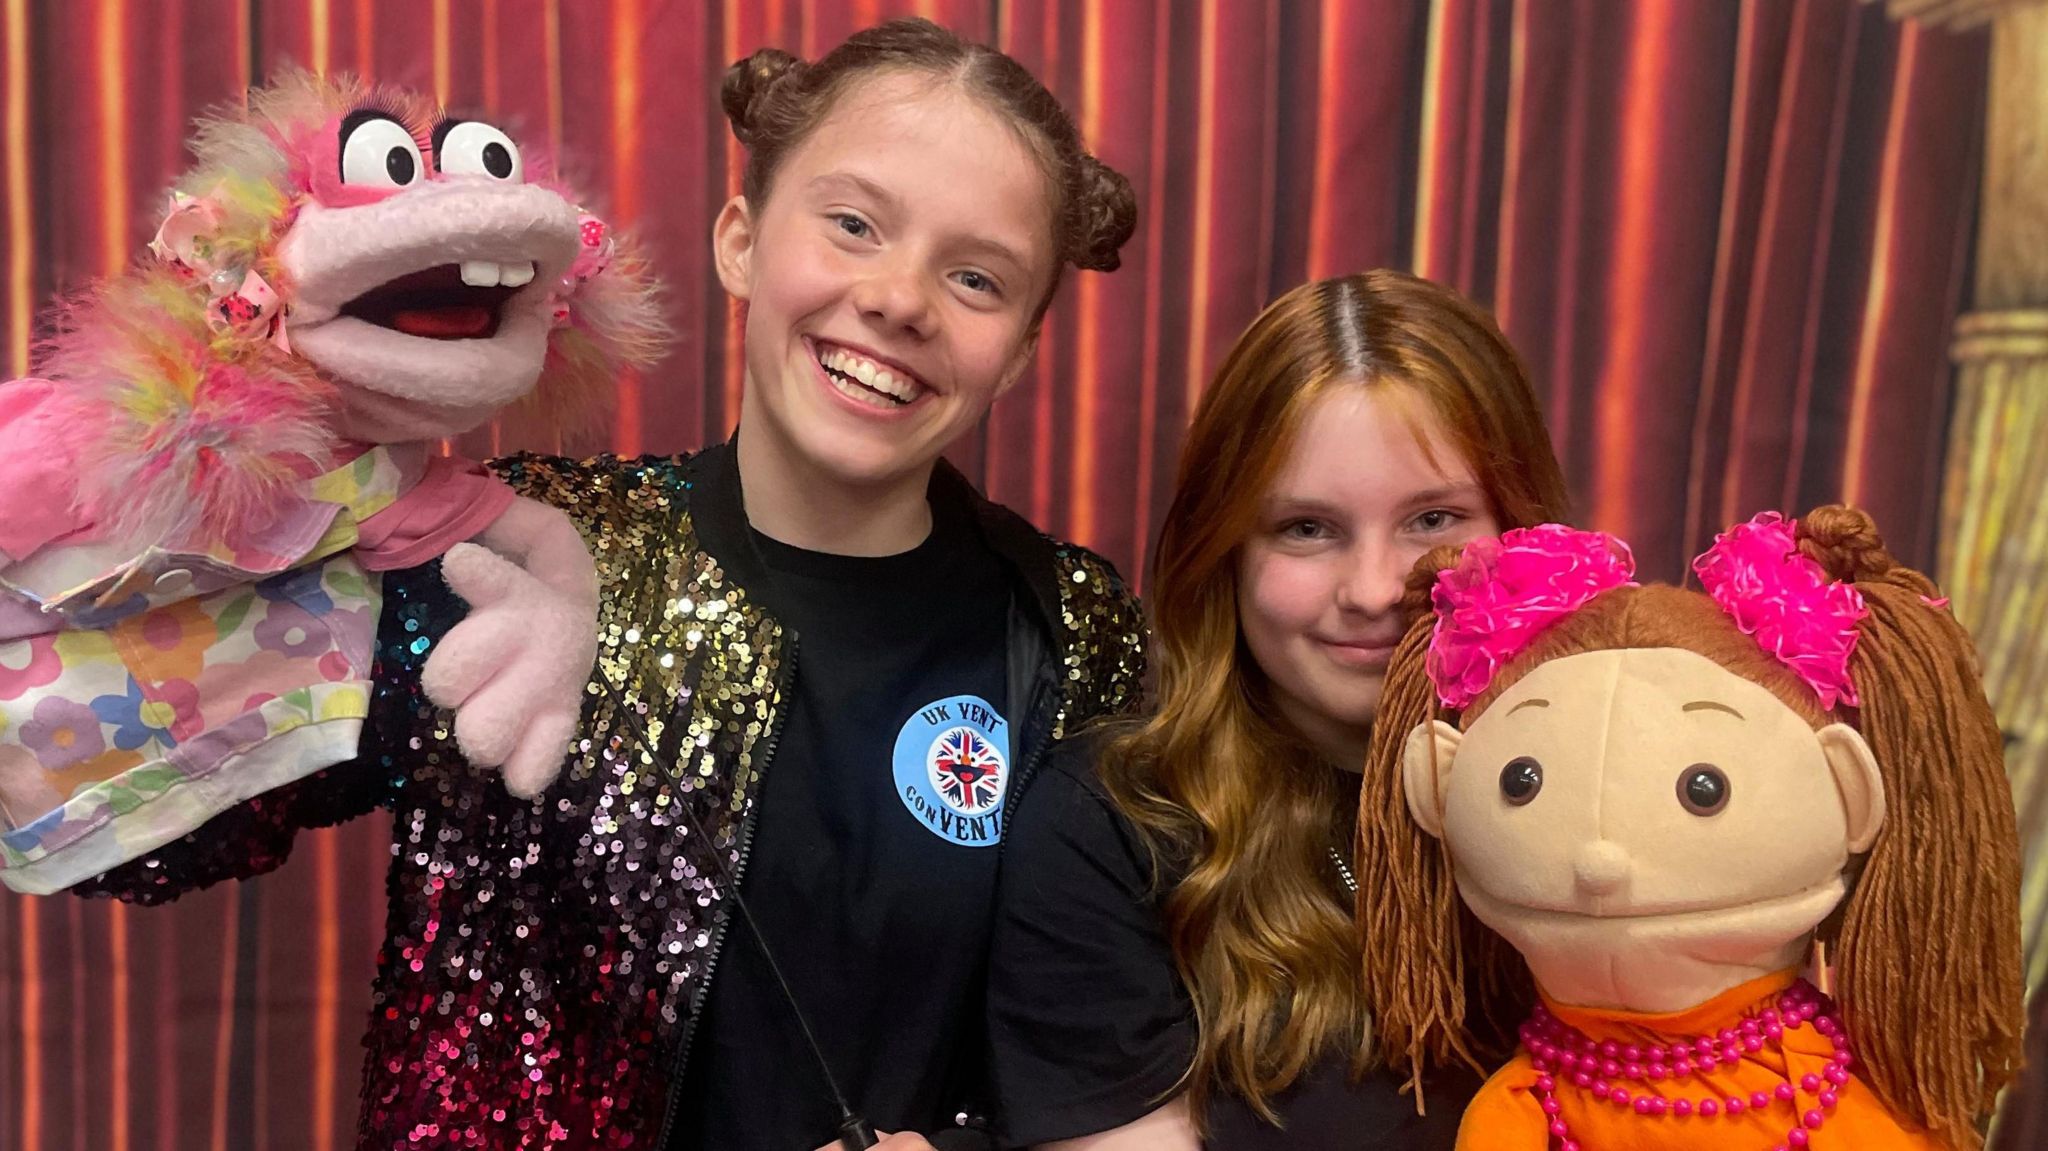 Two teenager girls smiling with their puppets